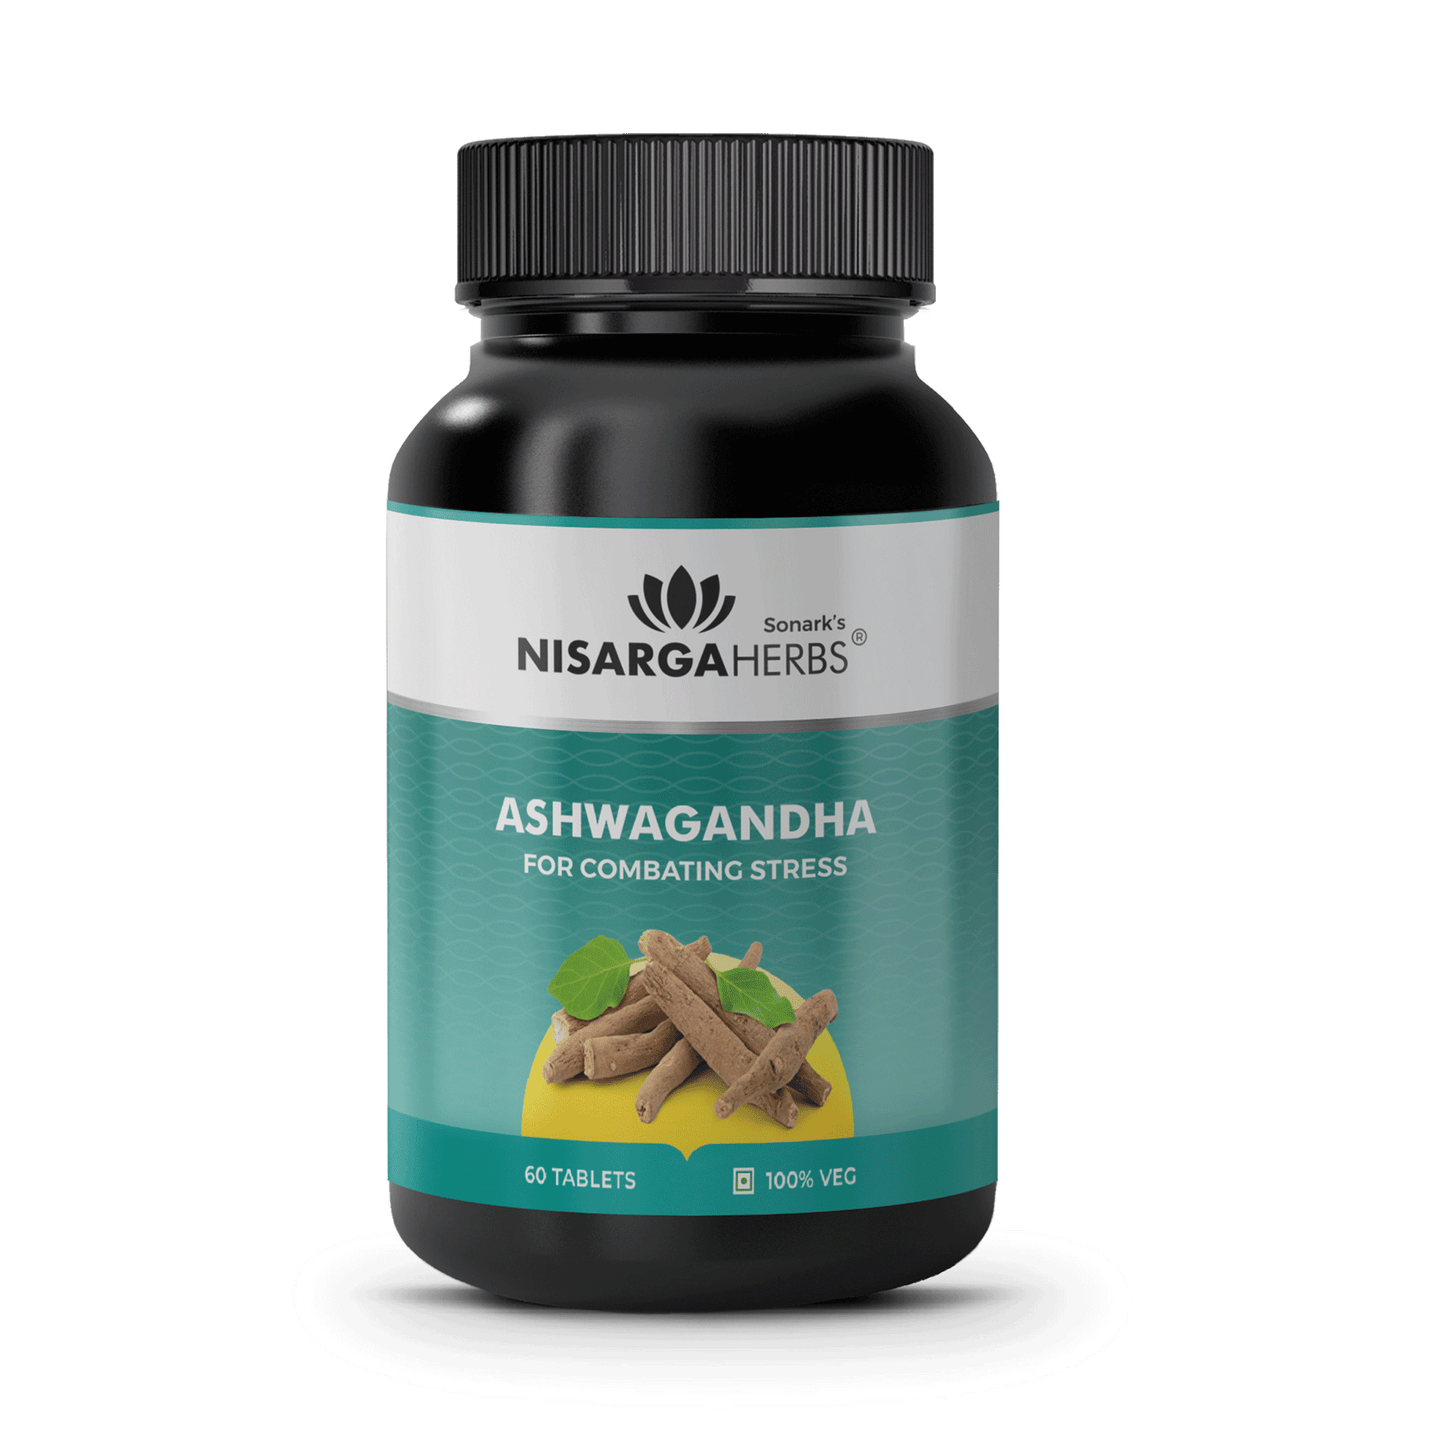 Ashwagandha Tablet - Reduces stress, supports strength and muscle building